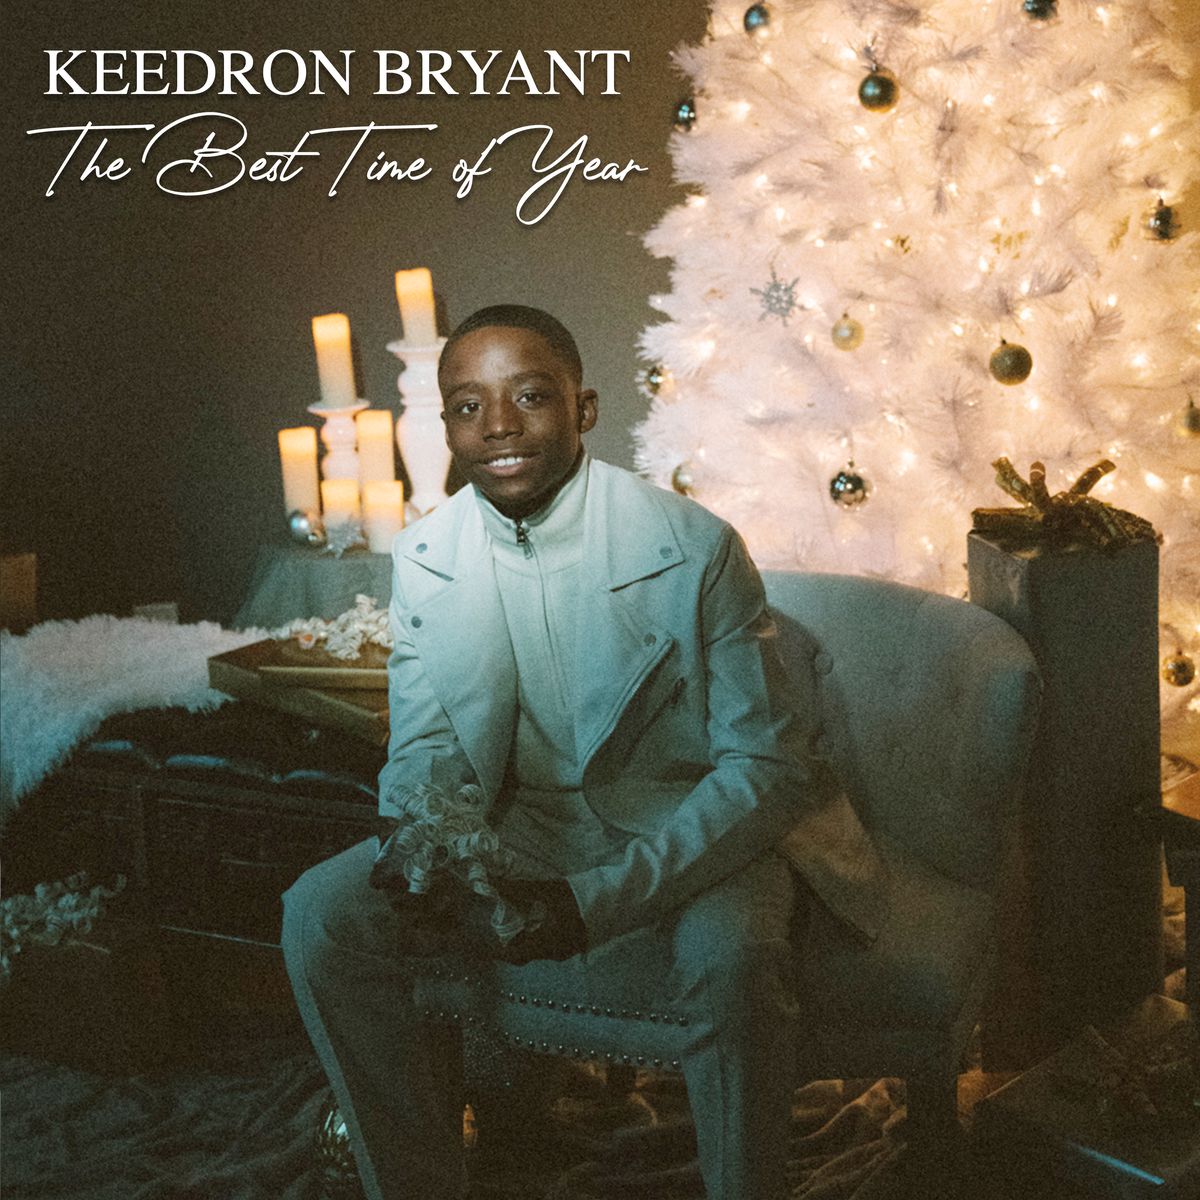 This cover image released by Warner Records shows “The Best Time of Year” by Keedron Bryant.